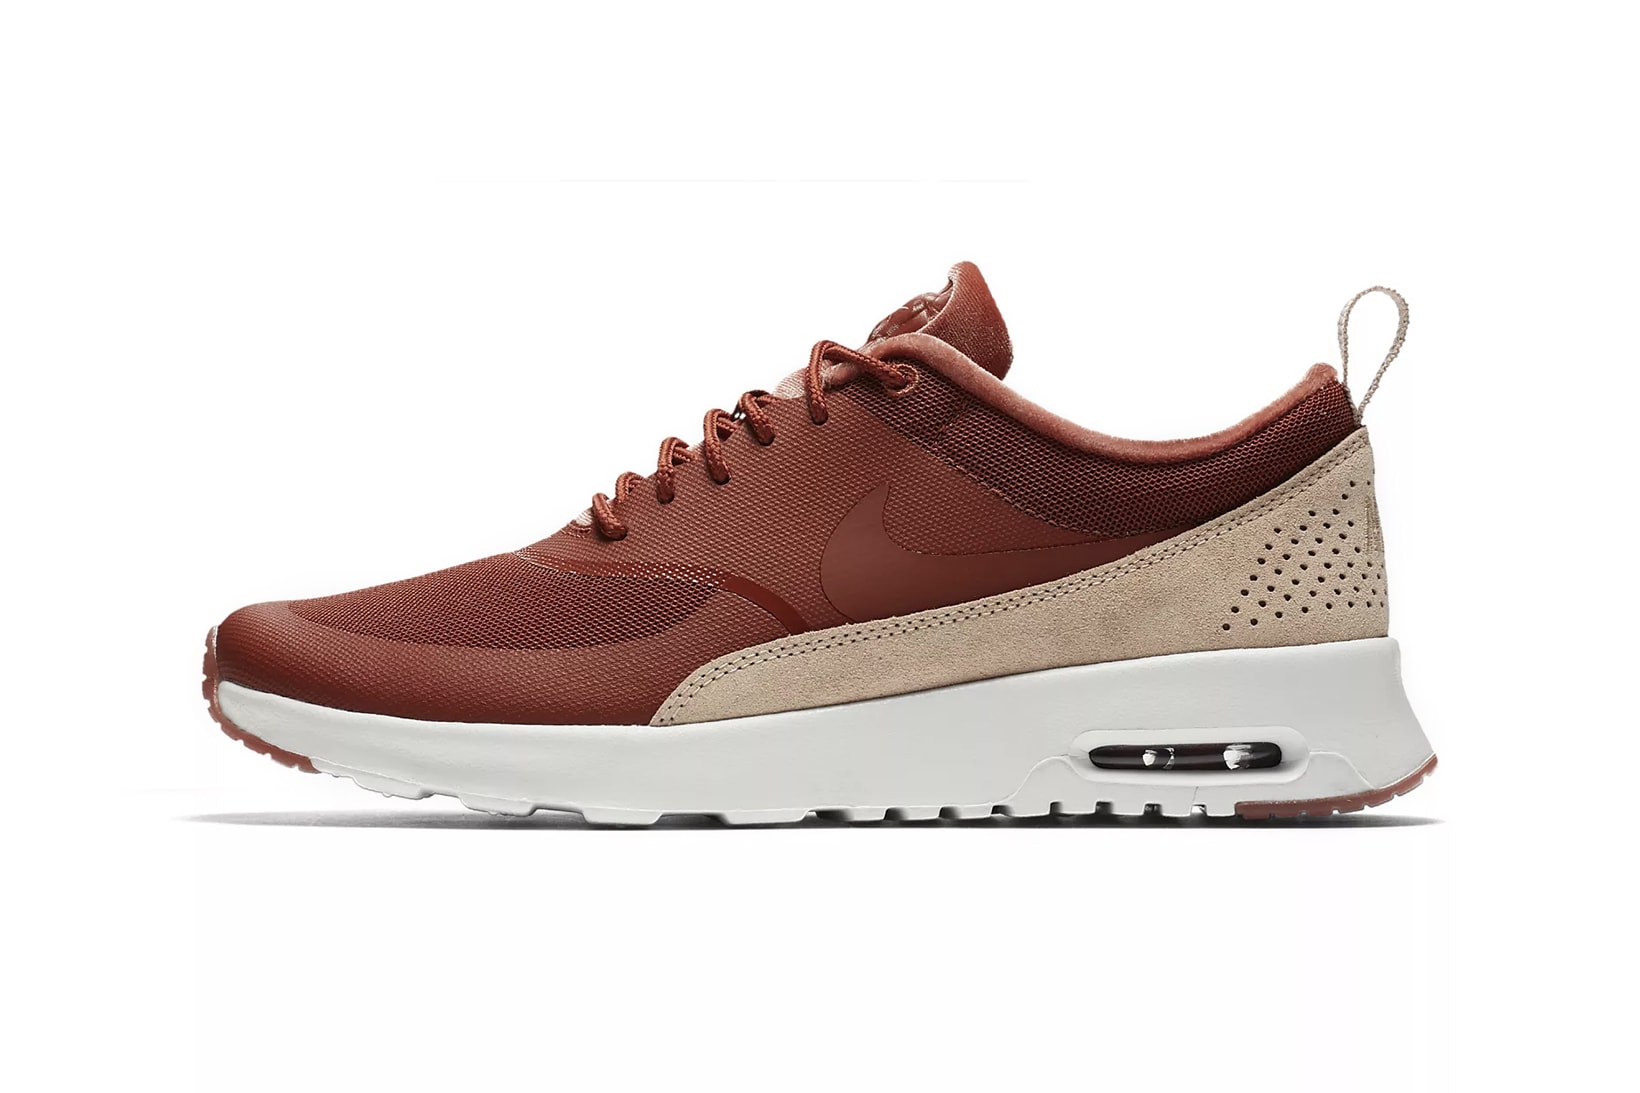 Nike Air Max Thea LX Dusty Peach Velvet Pink Rose Gold Ladies Women's Girls Sneakers where to buy